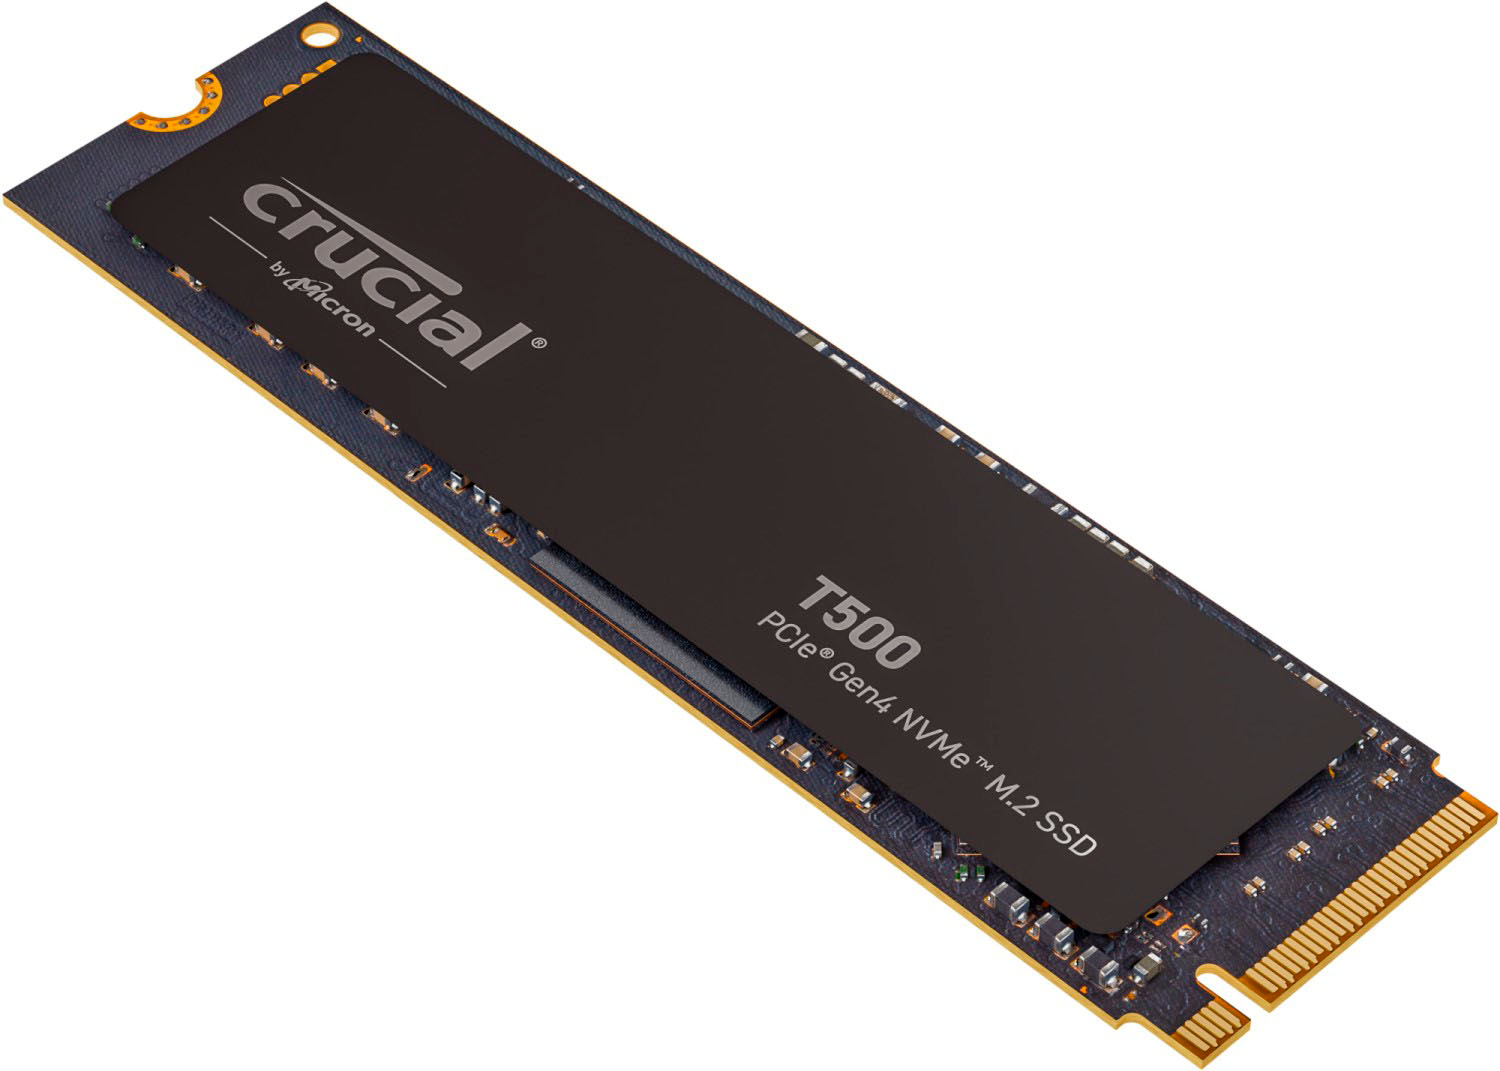  Crucial T500 1TB Gen4 NVMe M.2 Internal Gaming SSD, Up to  7300MB/s, Laptop & Desktop Compatible + 1mo Adobe CC All Apps -  CT1000T500SSD8 : Electronics